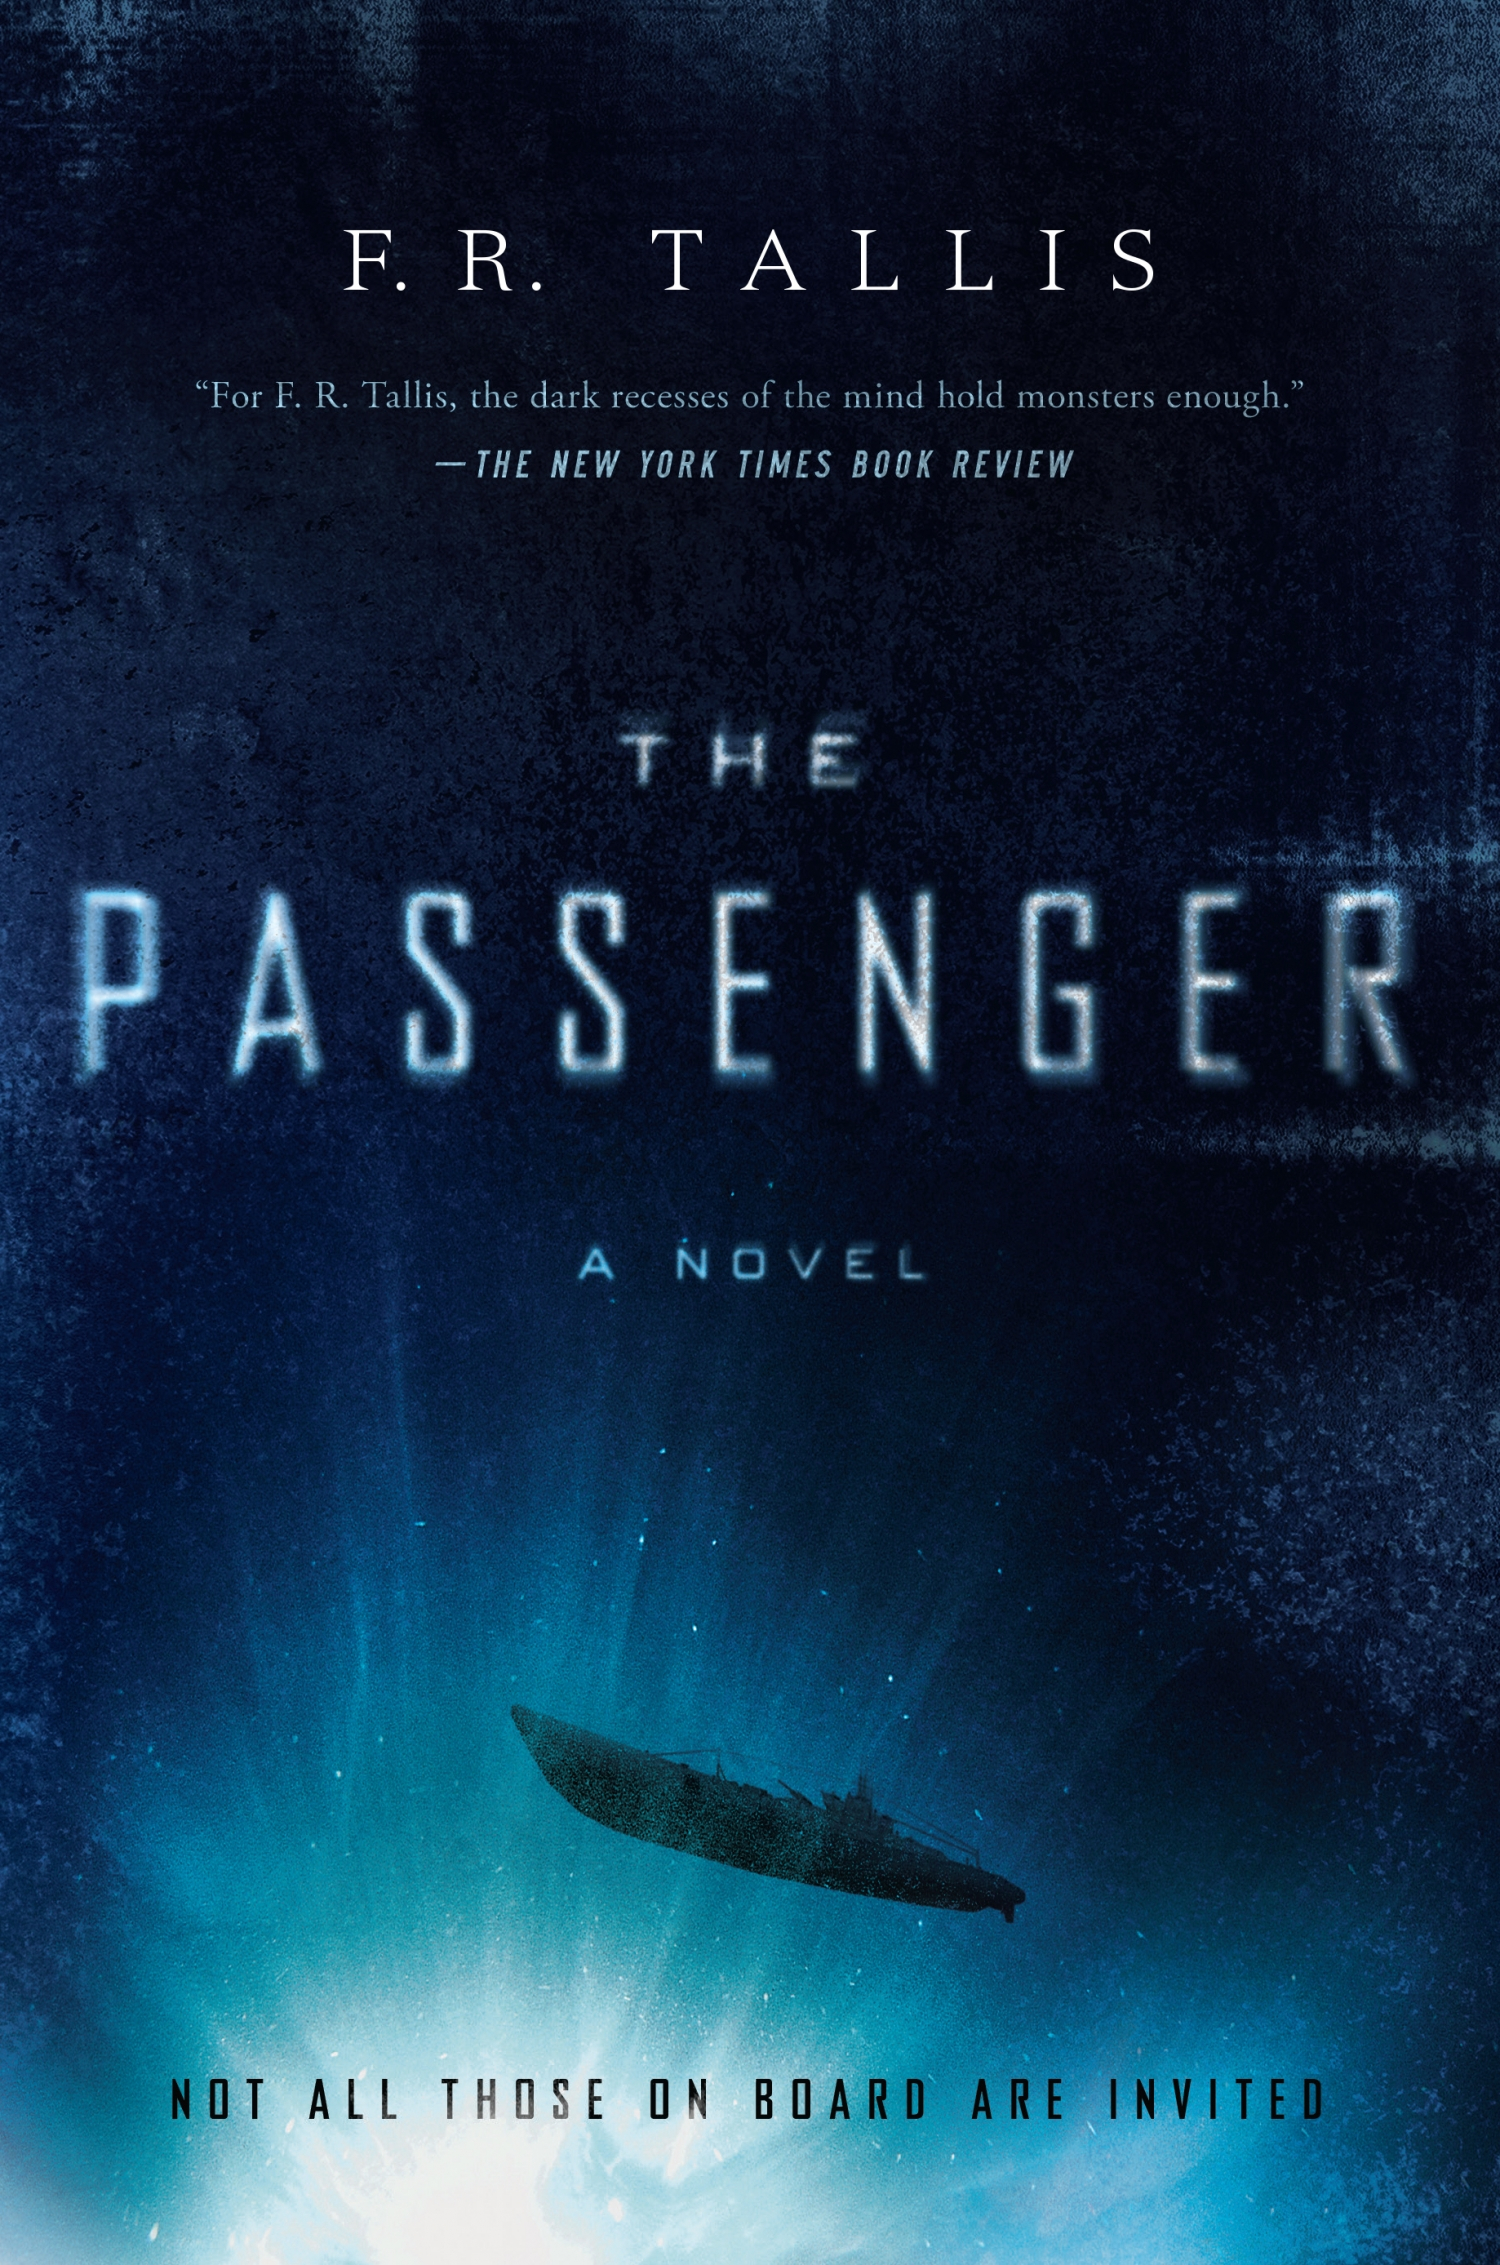 book review the passenger